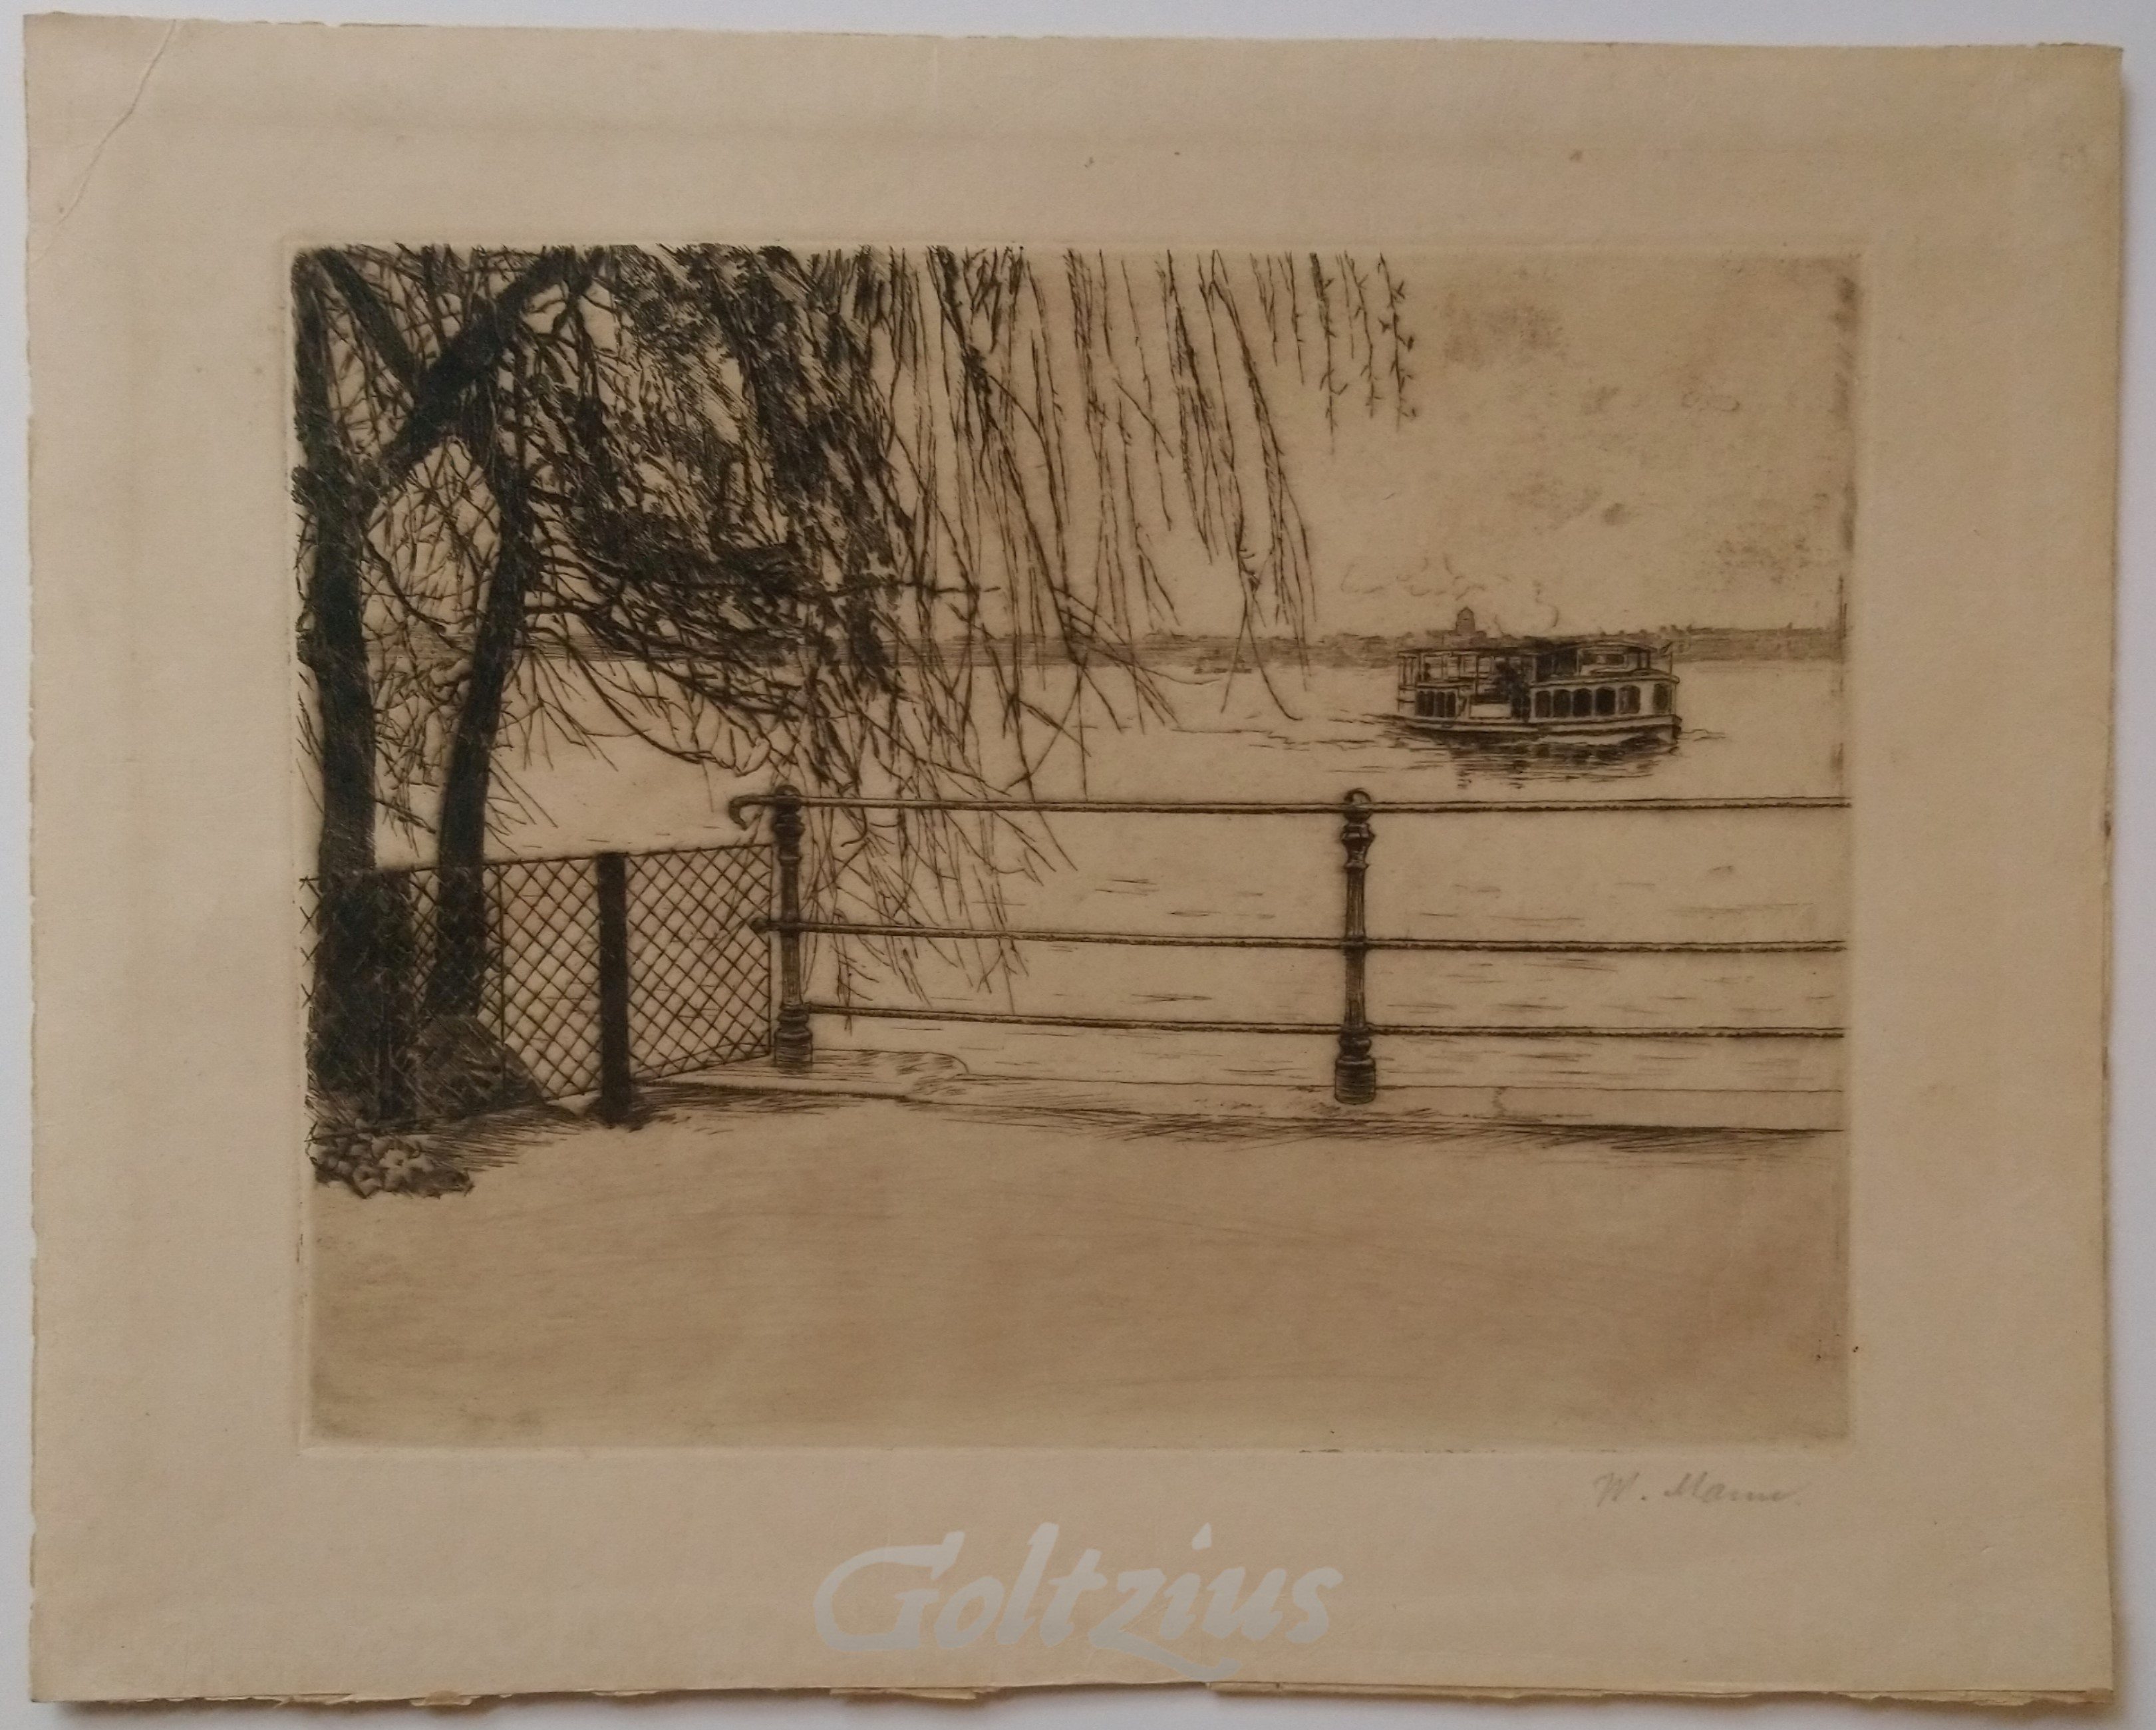 UNKNOWN (SIGNED IN PENCIL BUT UNREADABLE), Riverscape with passenger boat